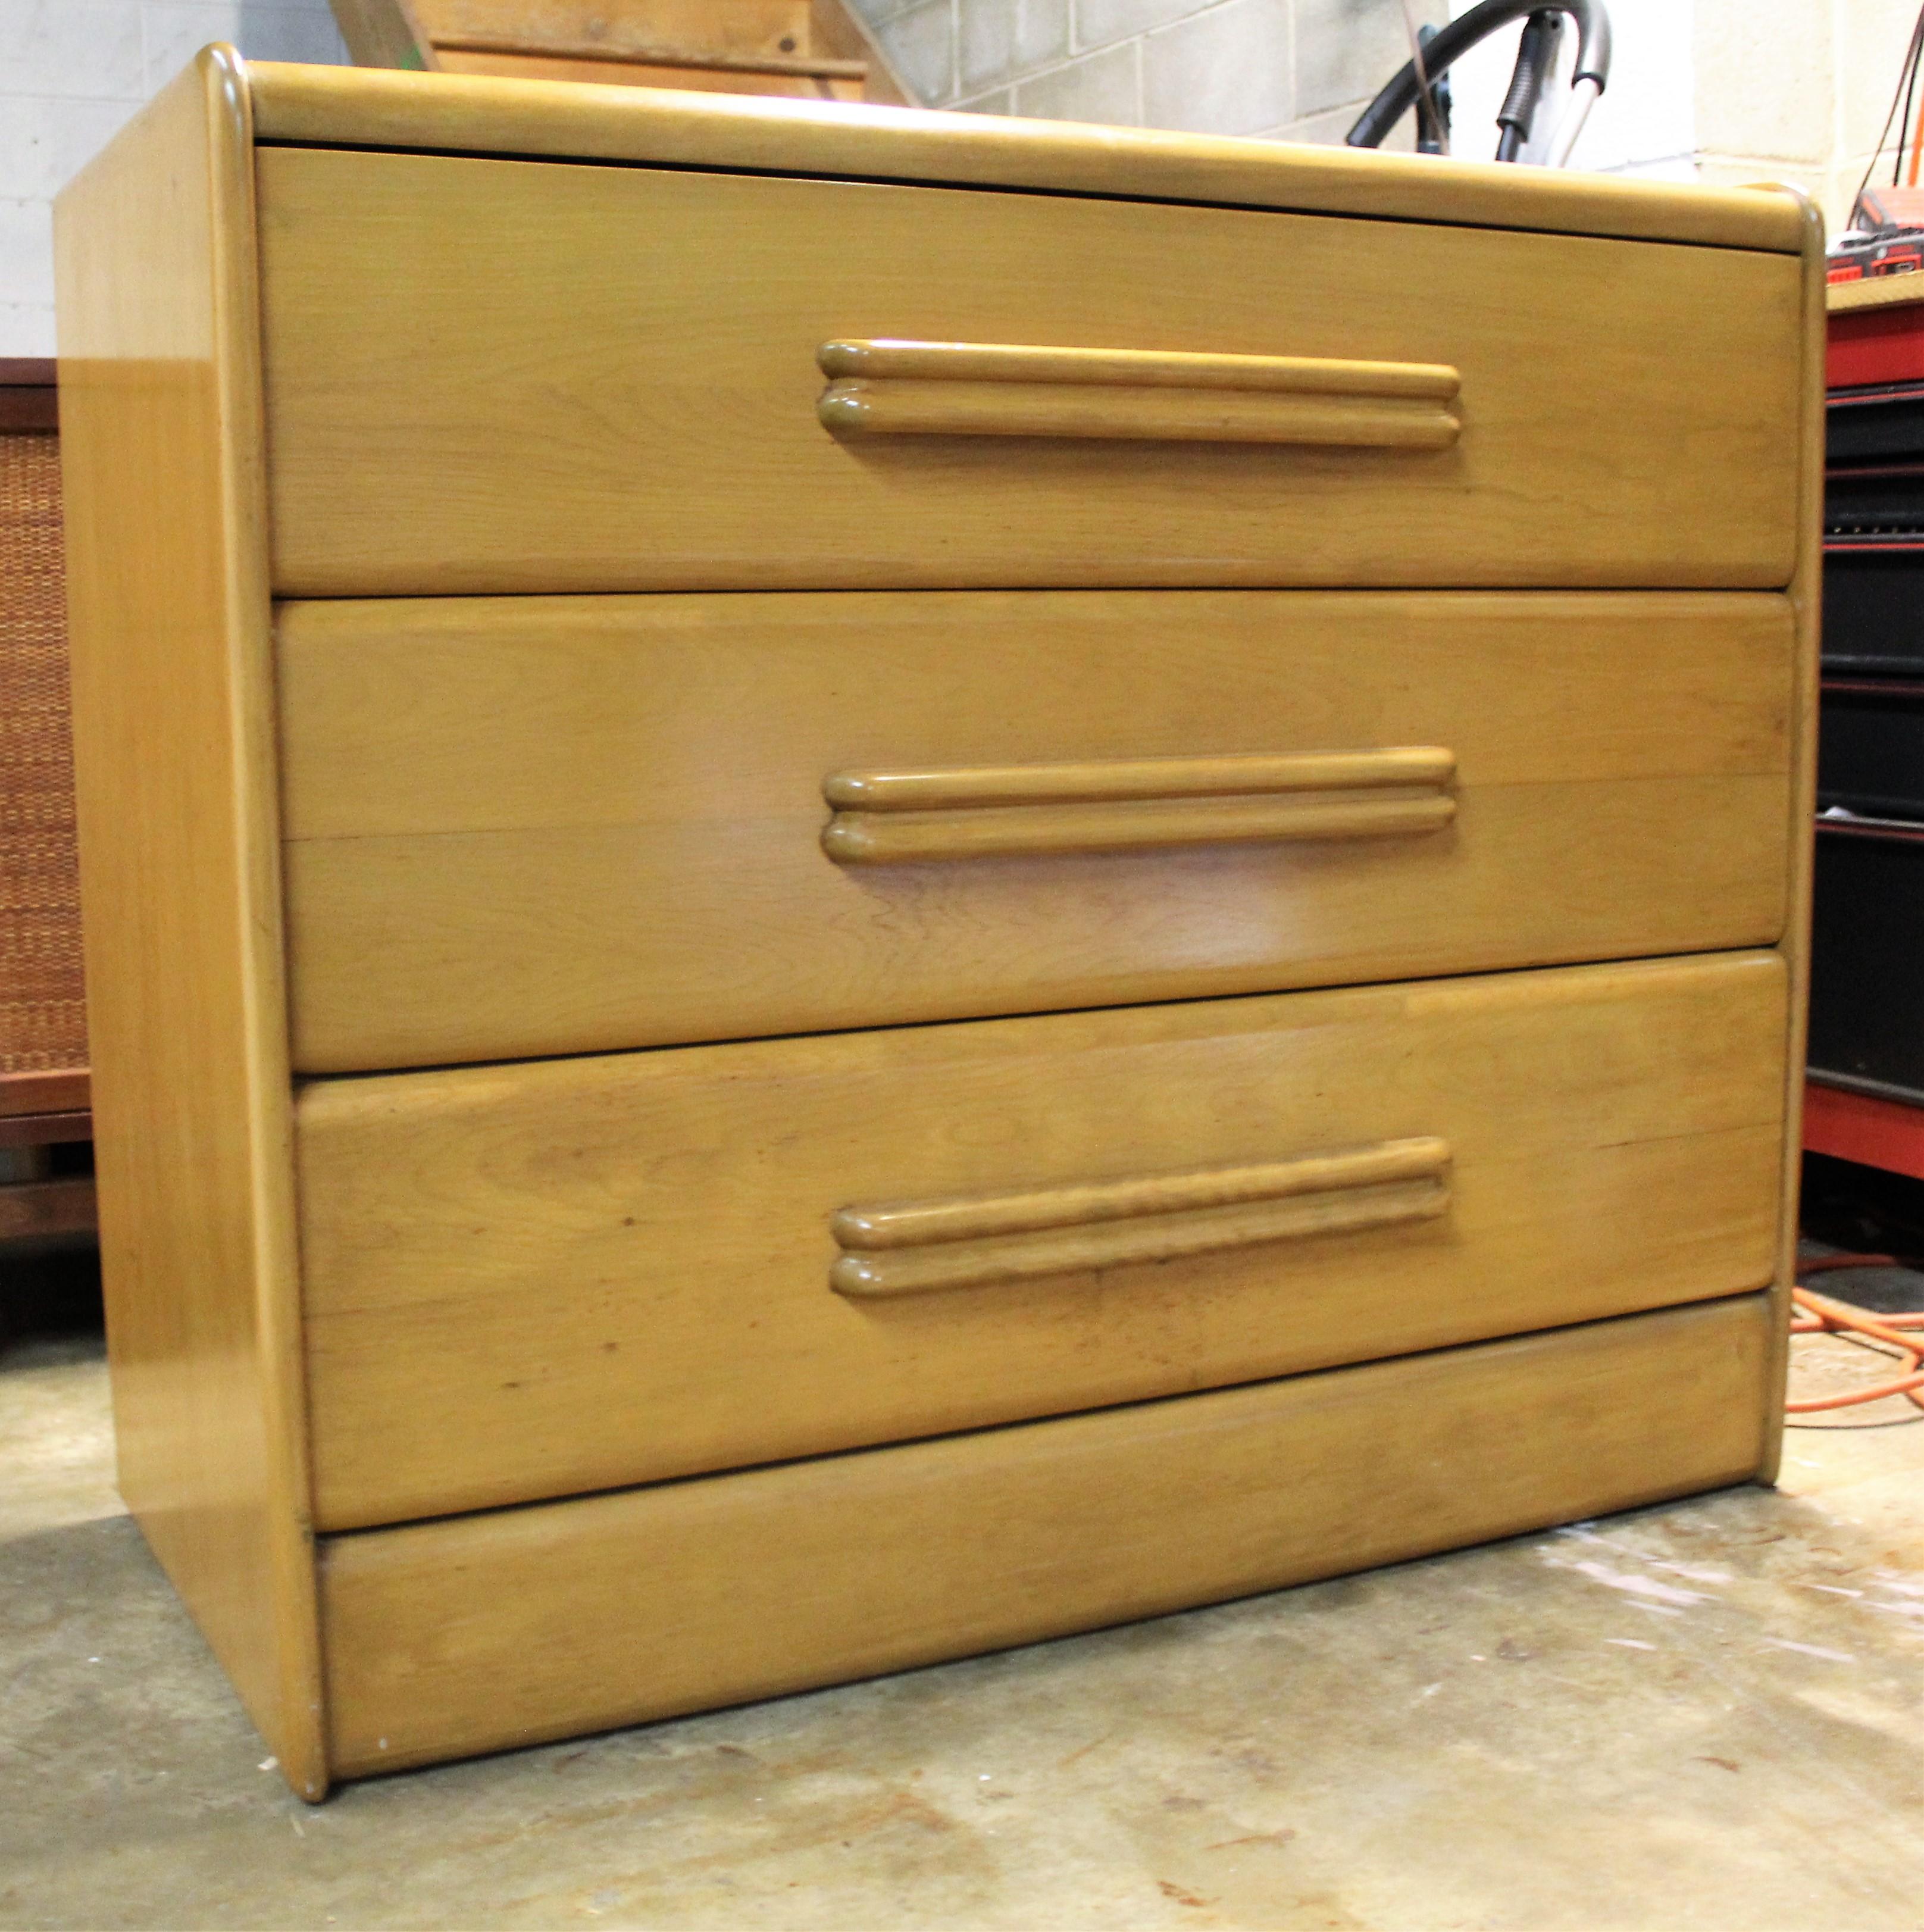 Offered is a Heywood Wakefield bachelor chest with a wheat finish. The piece is in good condition considering its age, circa 1940s, showing some age wear. It is signed Heywood Wakefield. A great piece to add to any room in your